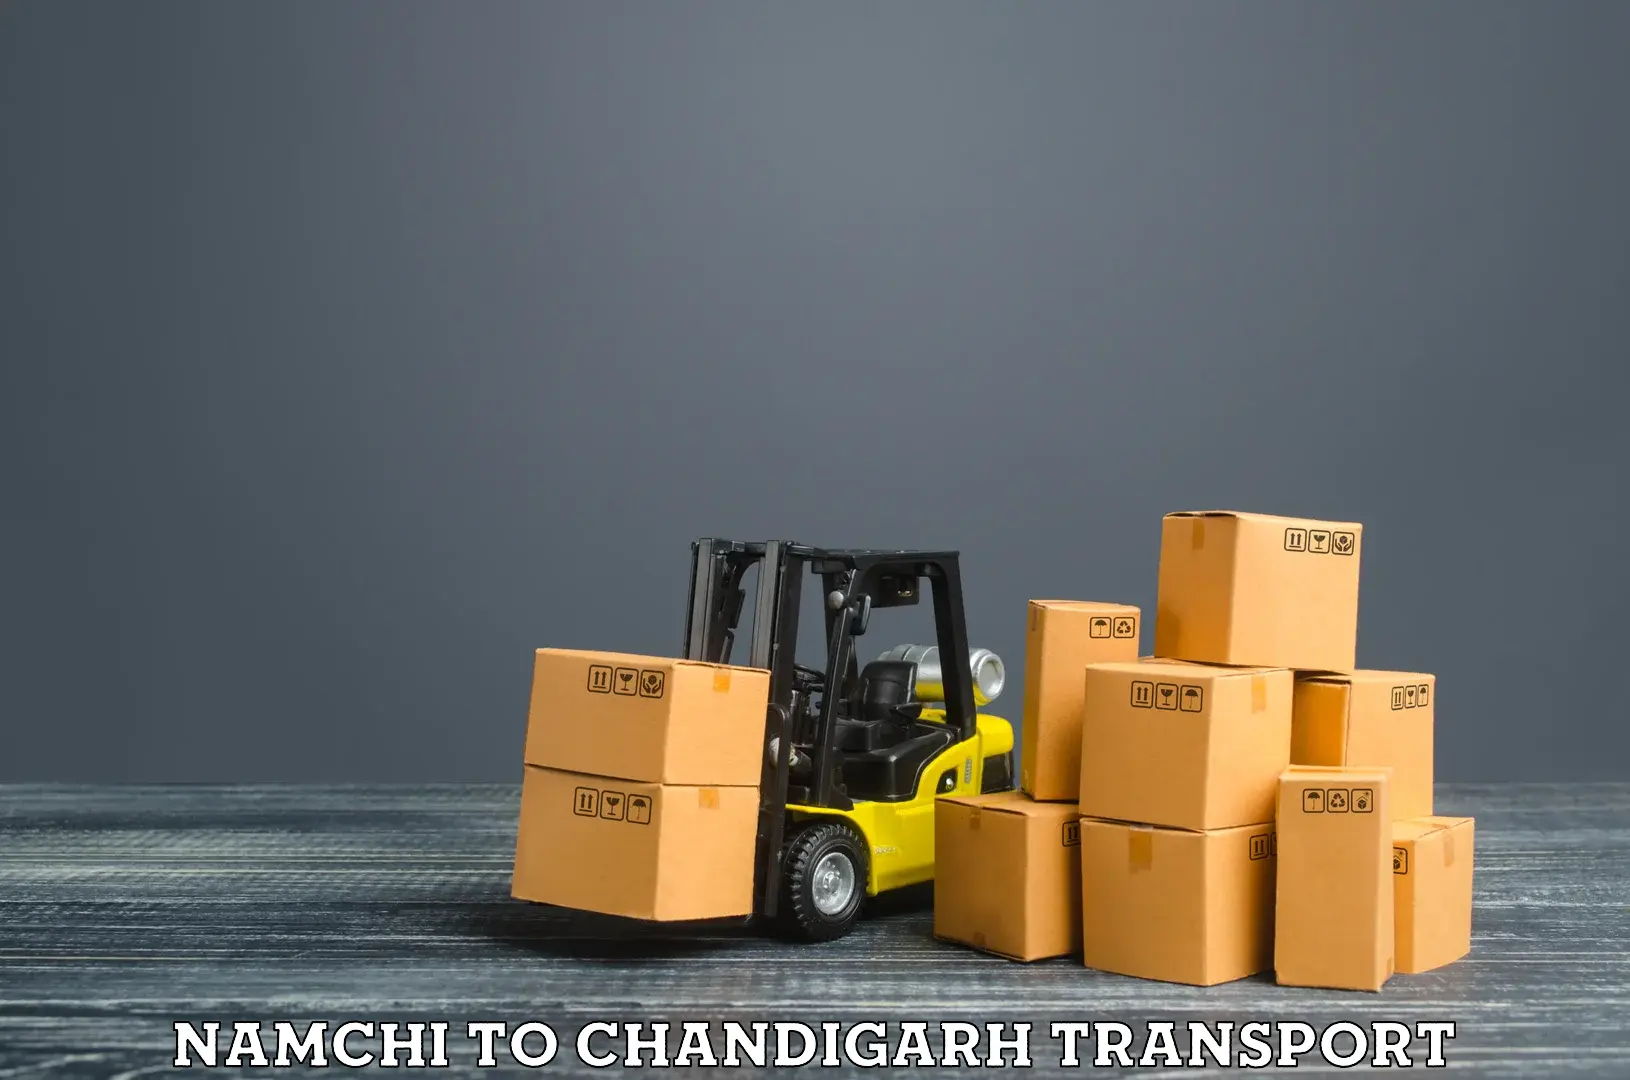 Delivery service Namchi to Chandigarh